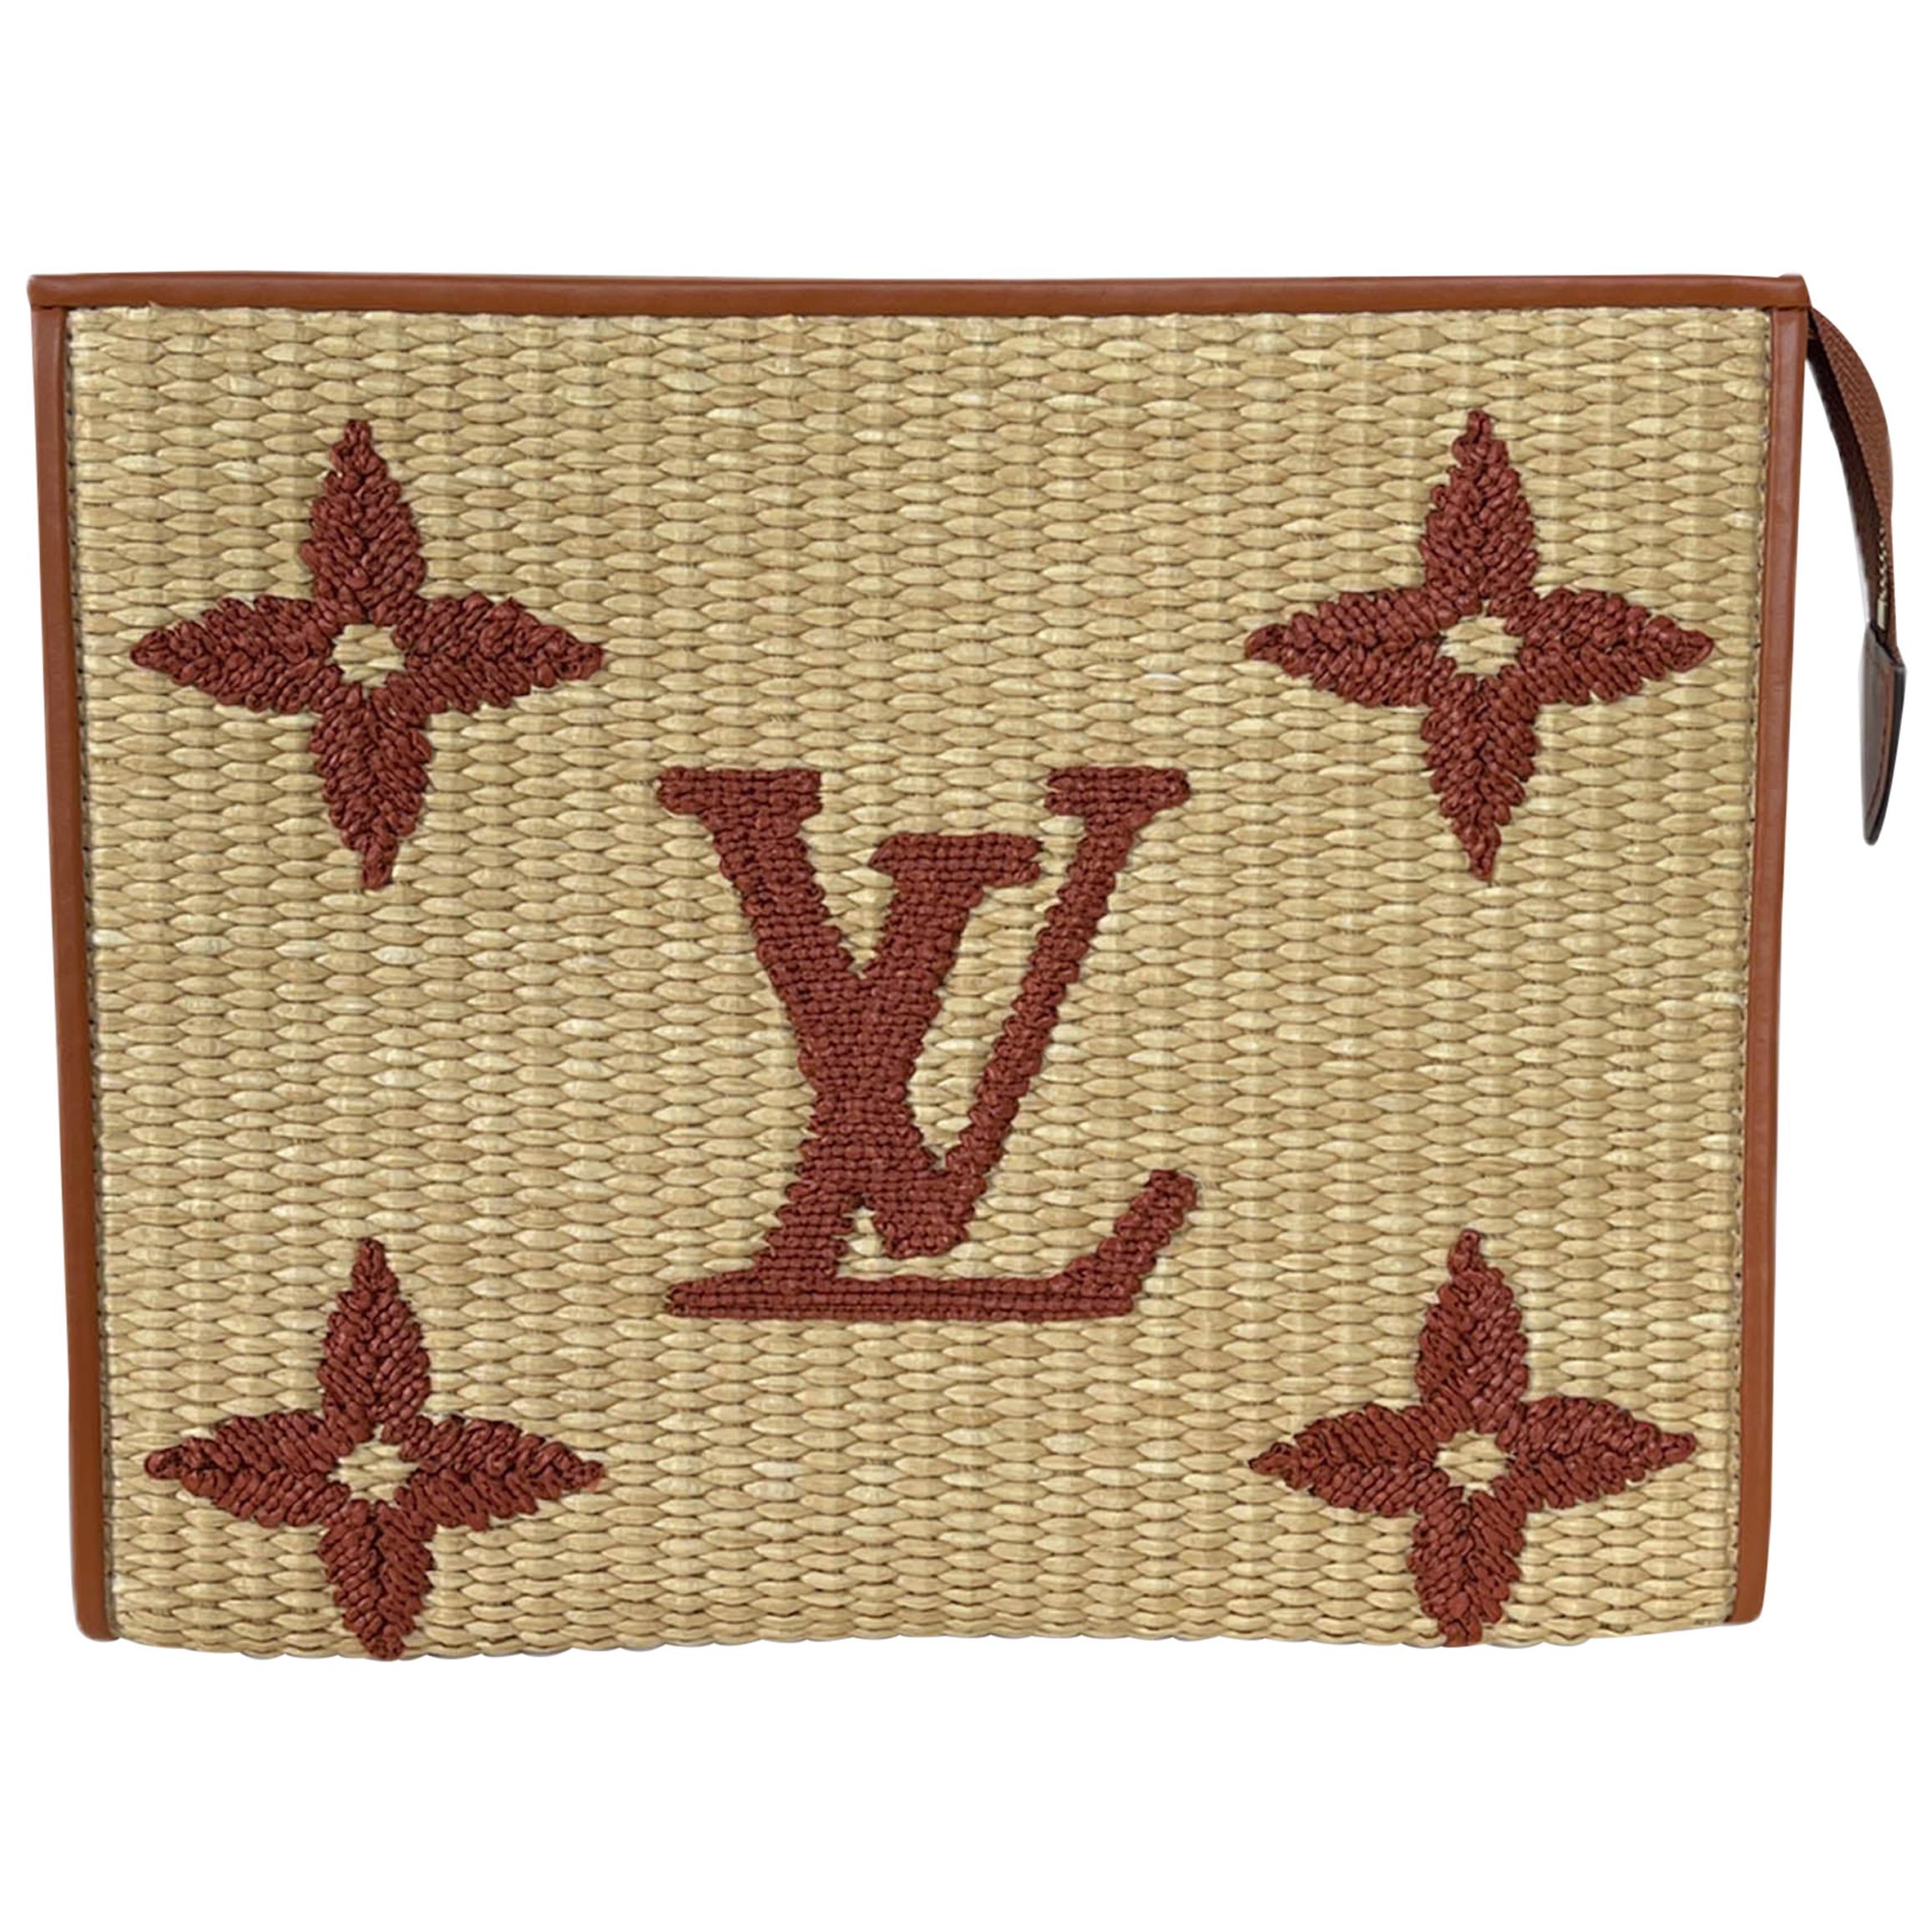 Louis Vuitton Monogram Canvas Toiletry Pouch 26- 2021 - A World Of